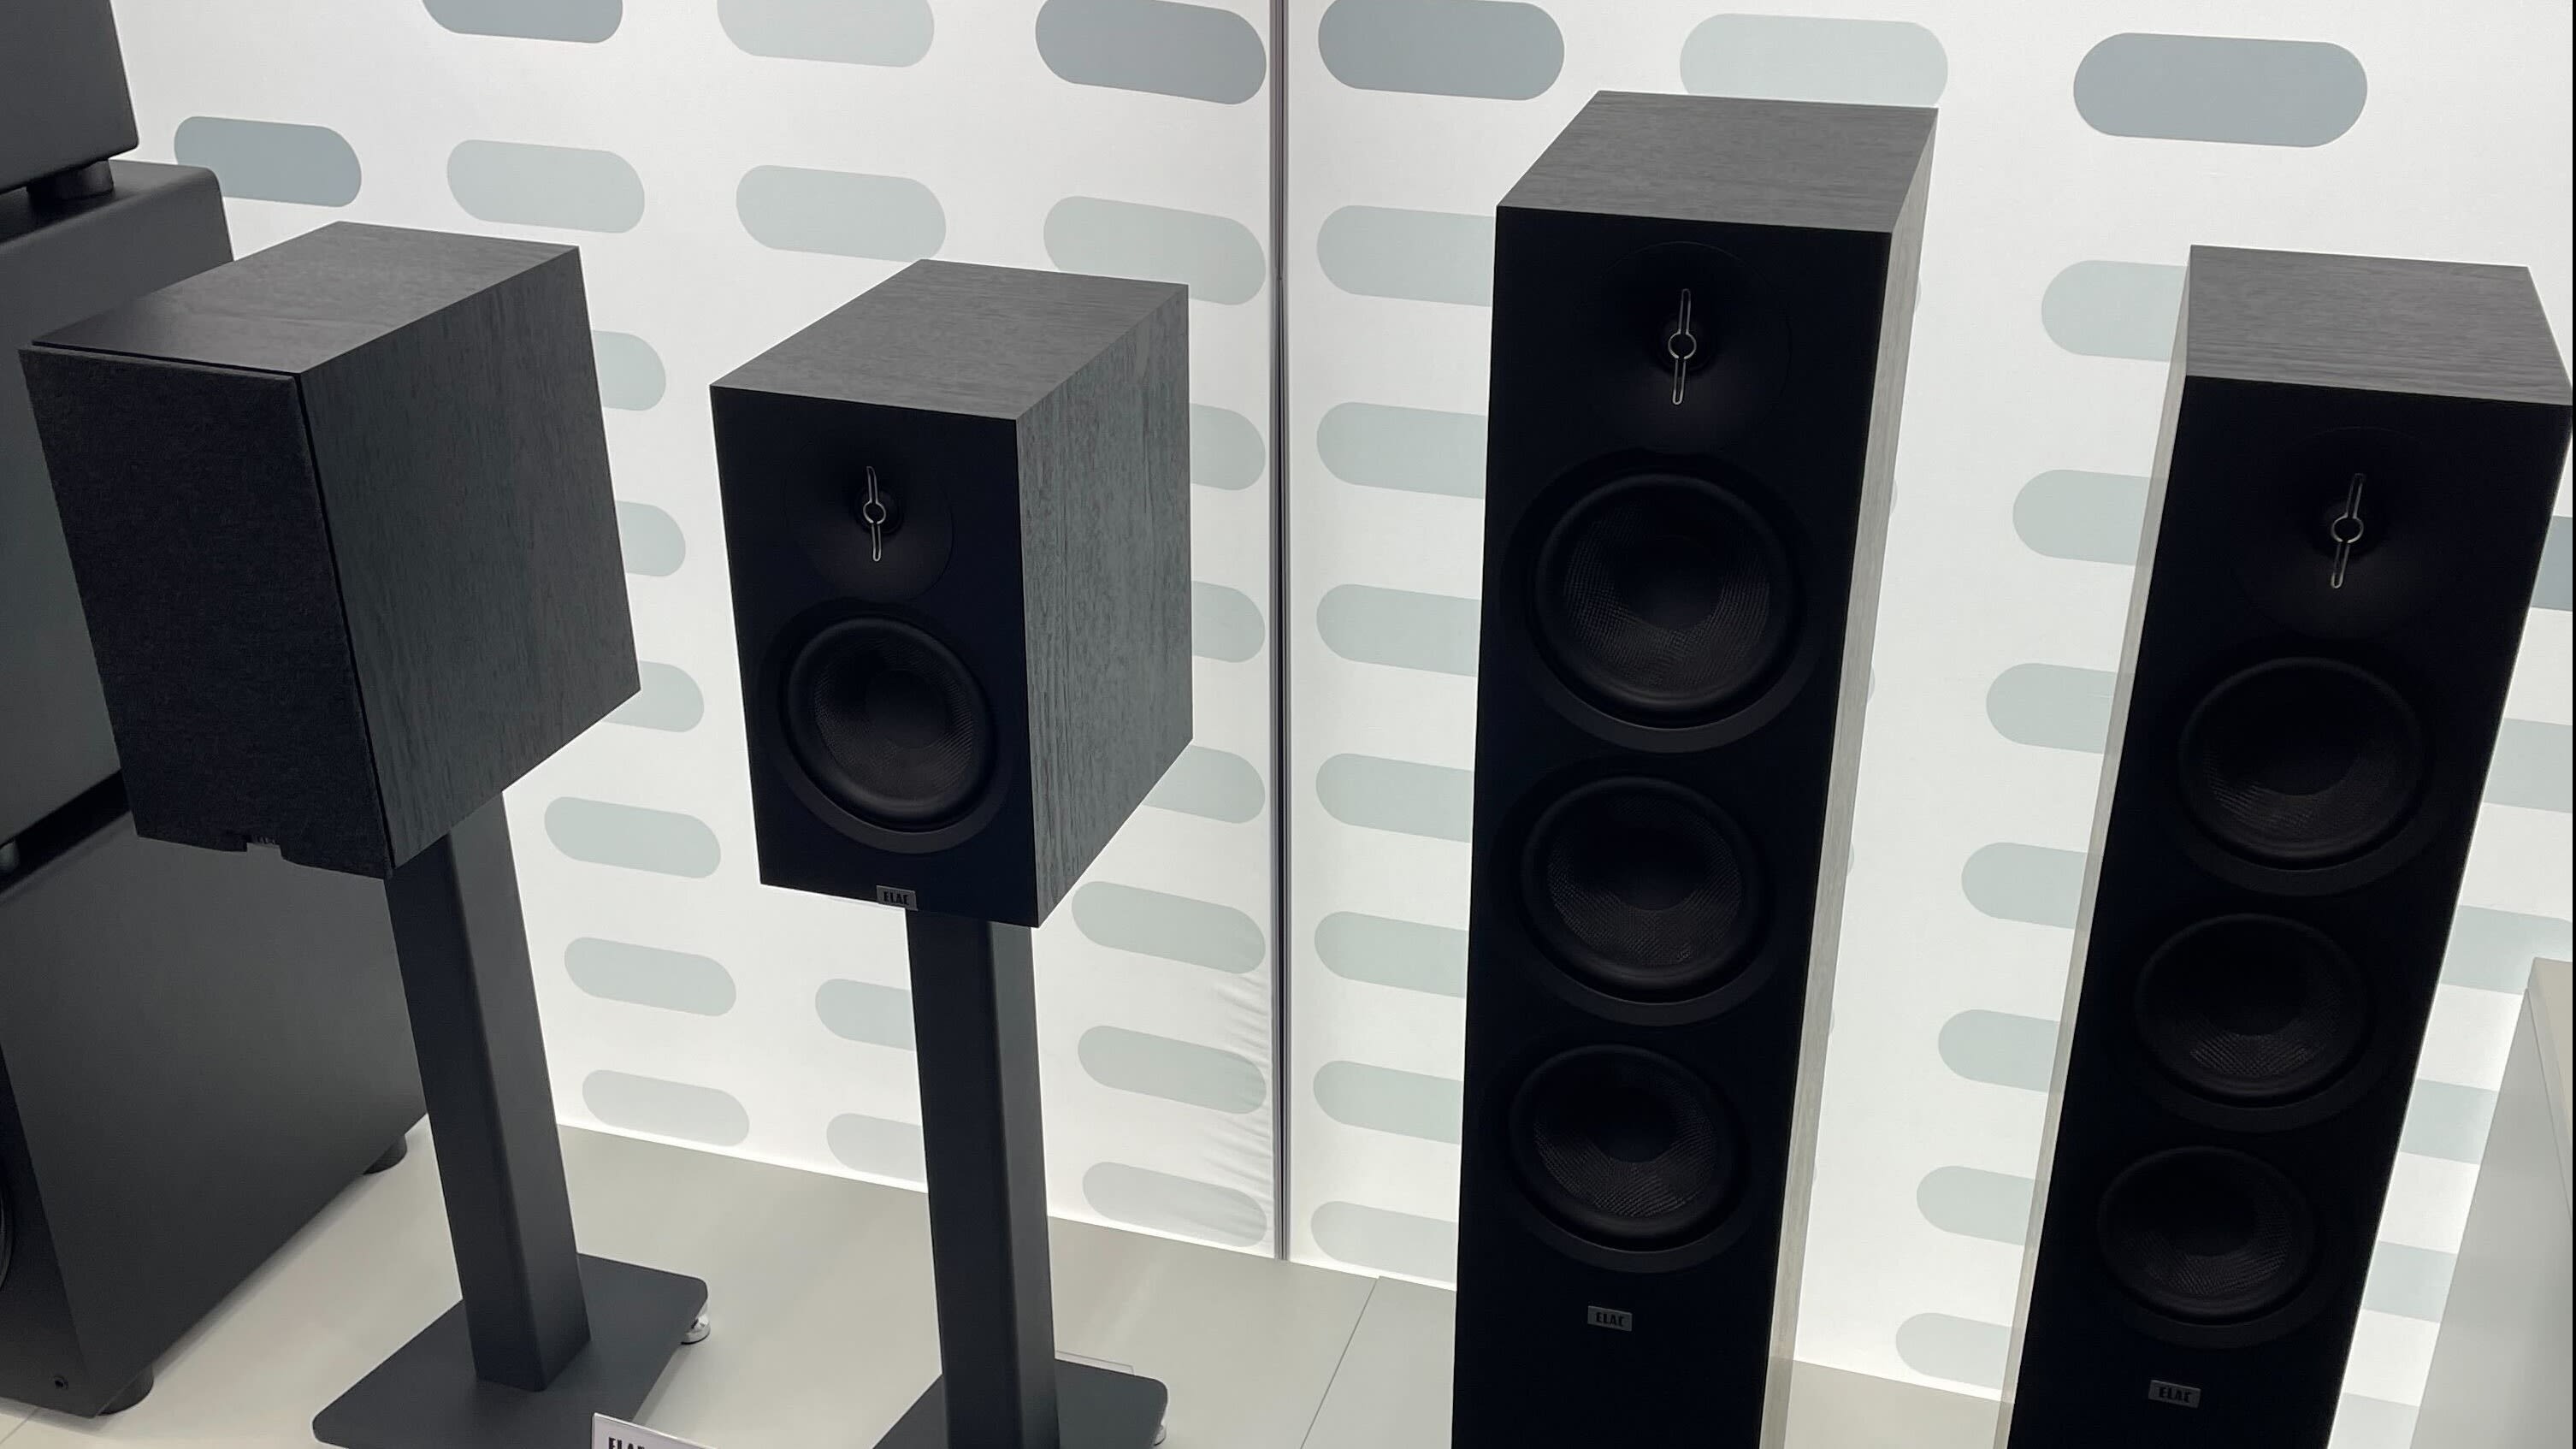 Elac updates its Award-winning Debut range with seven new speakers